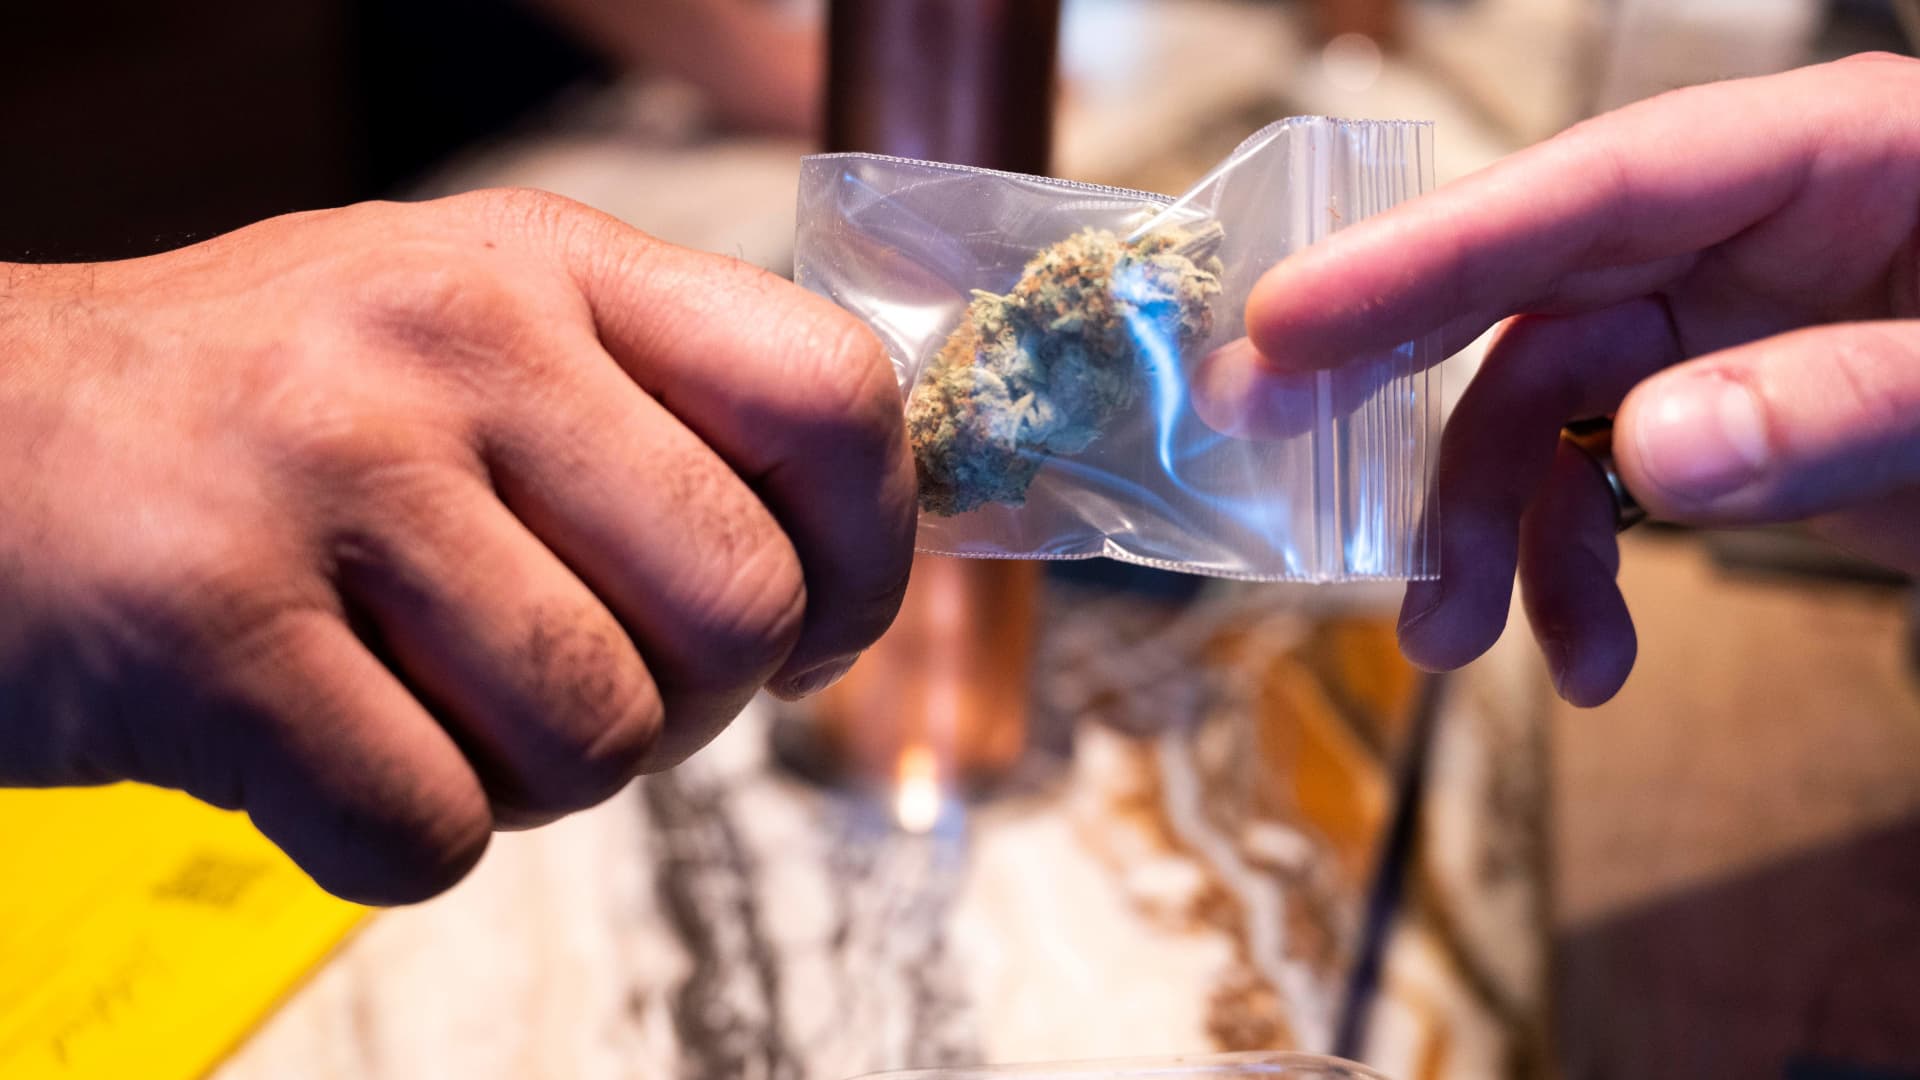 A customer buys marijuana in a coffee shop in the city centre of Amsterdam on January 8, 2021. -